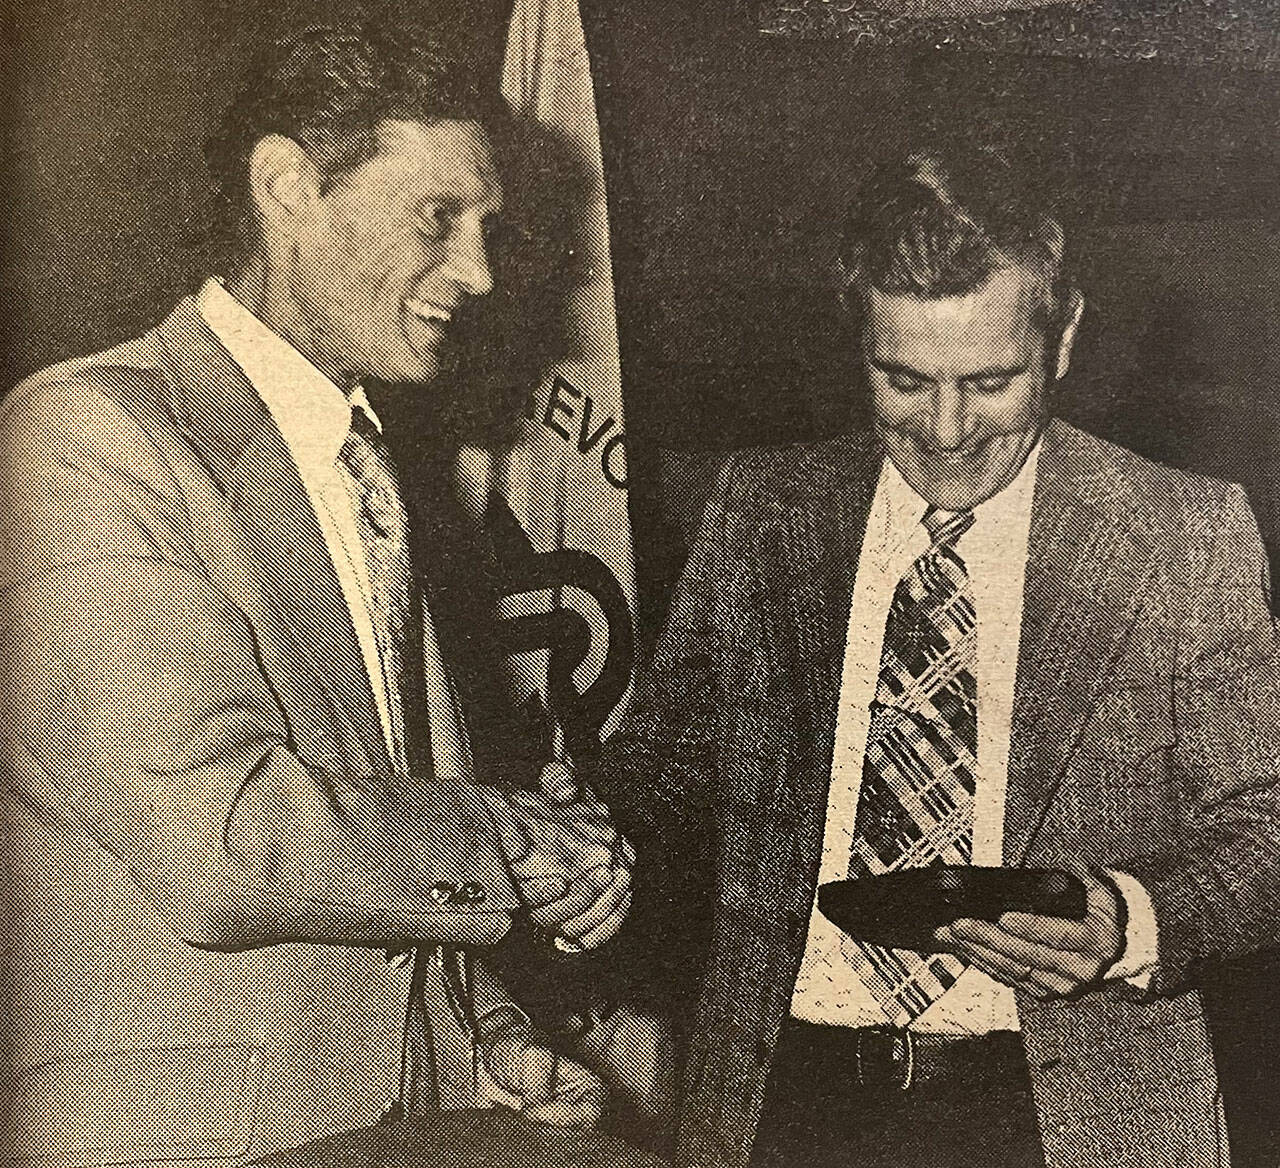 Sequim Gazette file photo/ Jerry Angiuli, right, was awarded Sequim Citizen of the Year in 1975 for his work with youth sports. He helped coach football, baseball, competitive shooting at various points in his life.